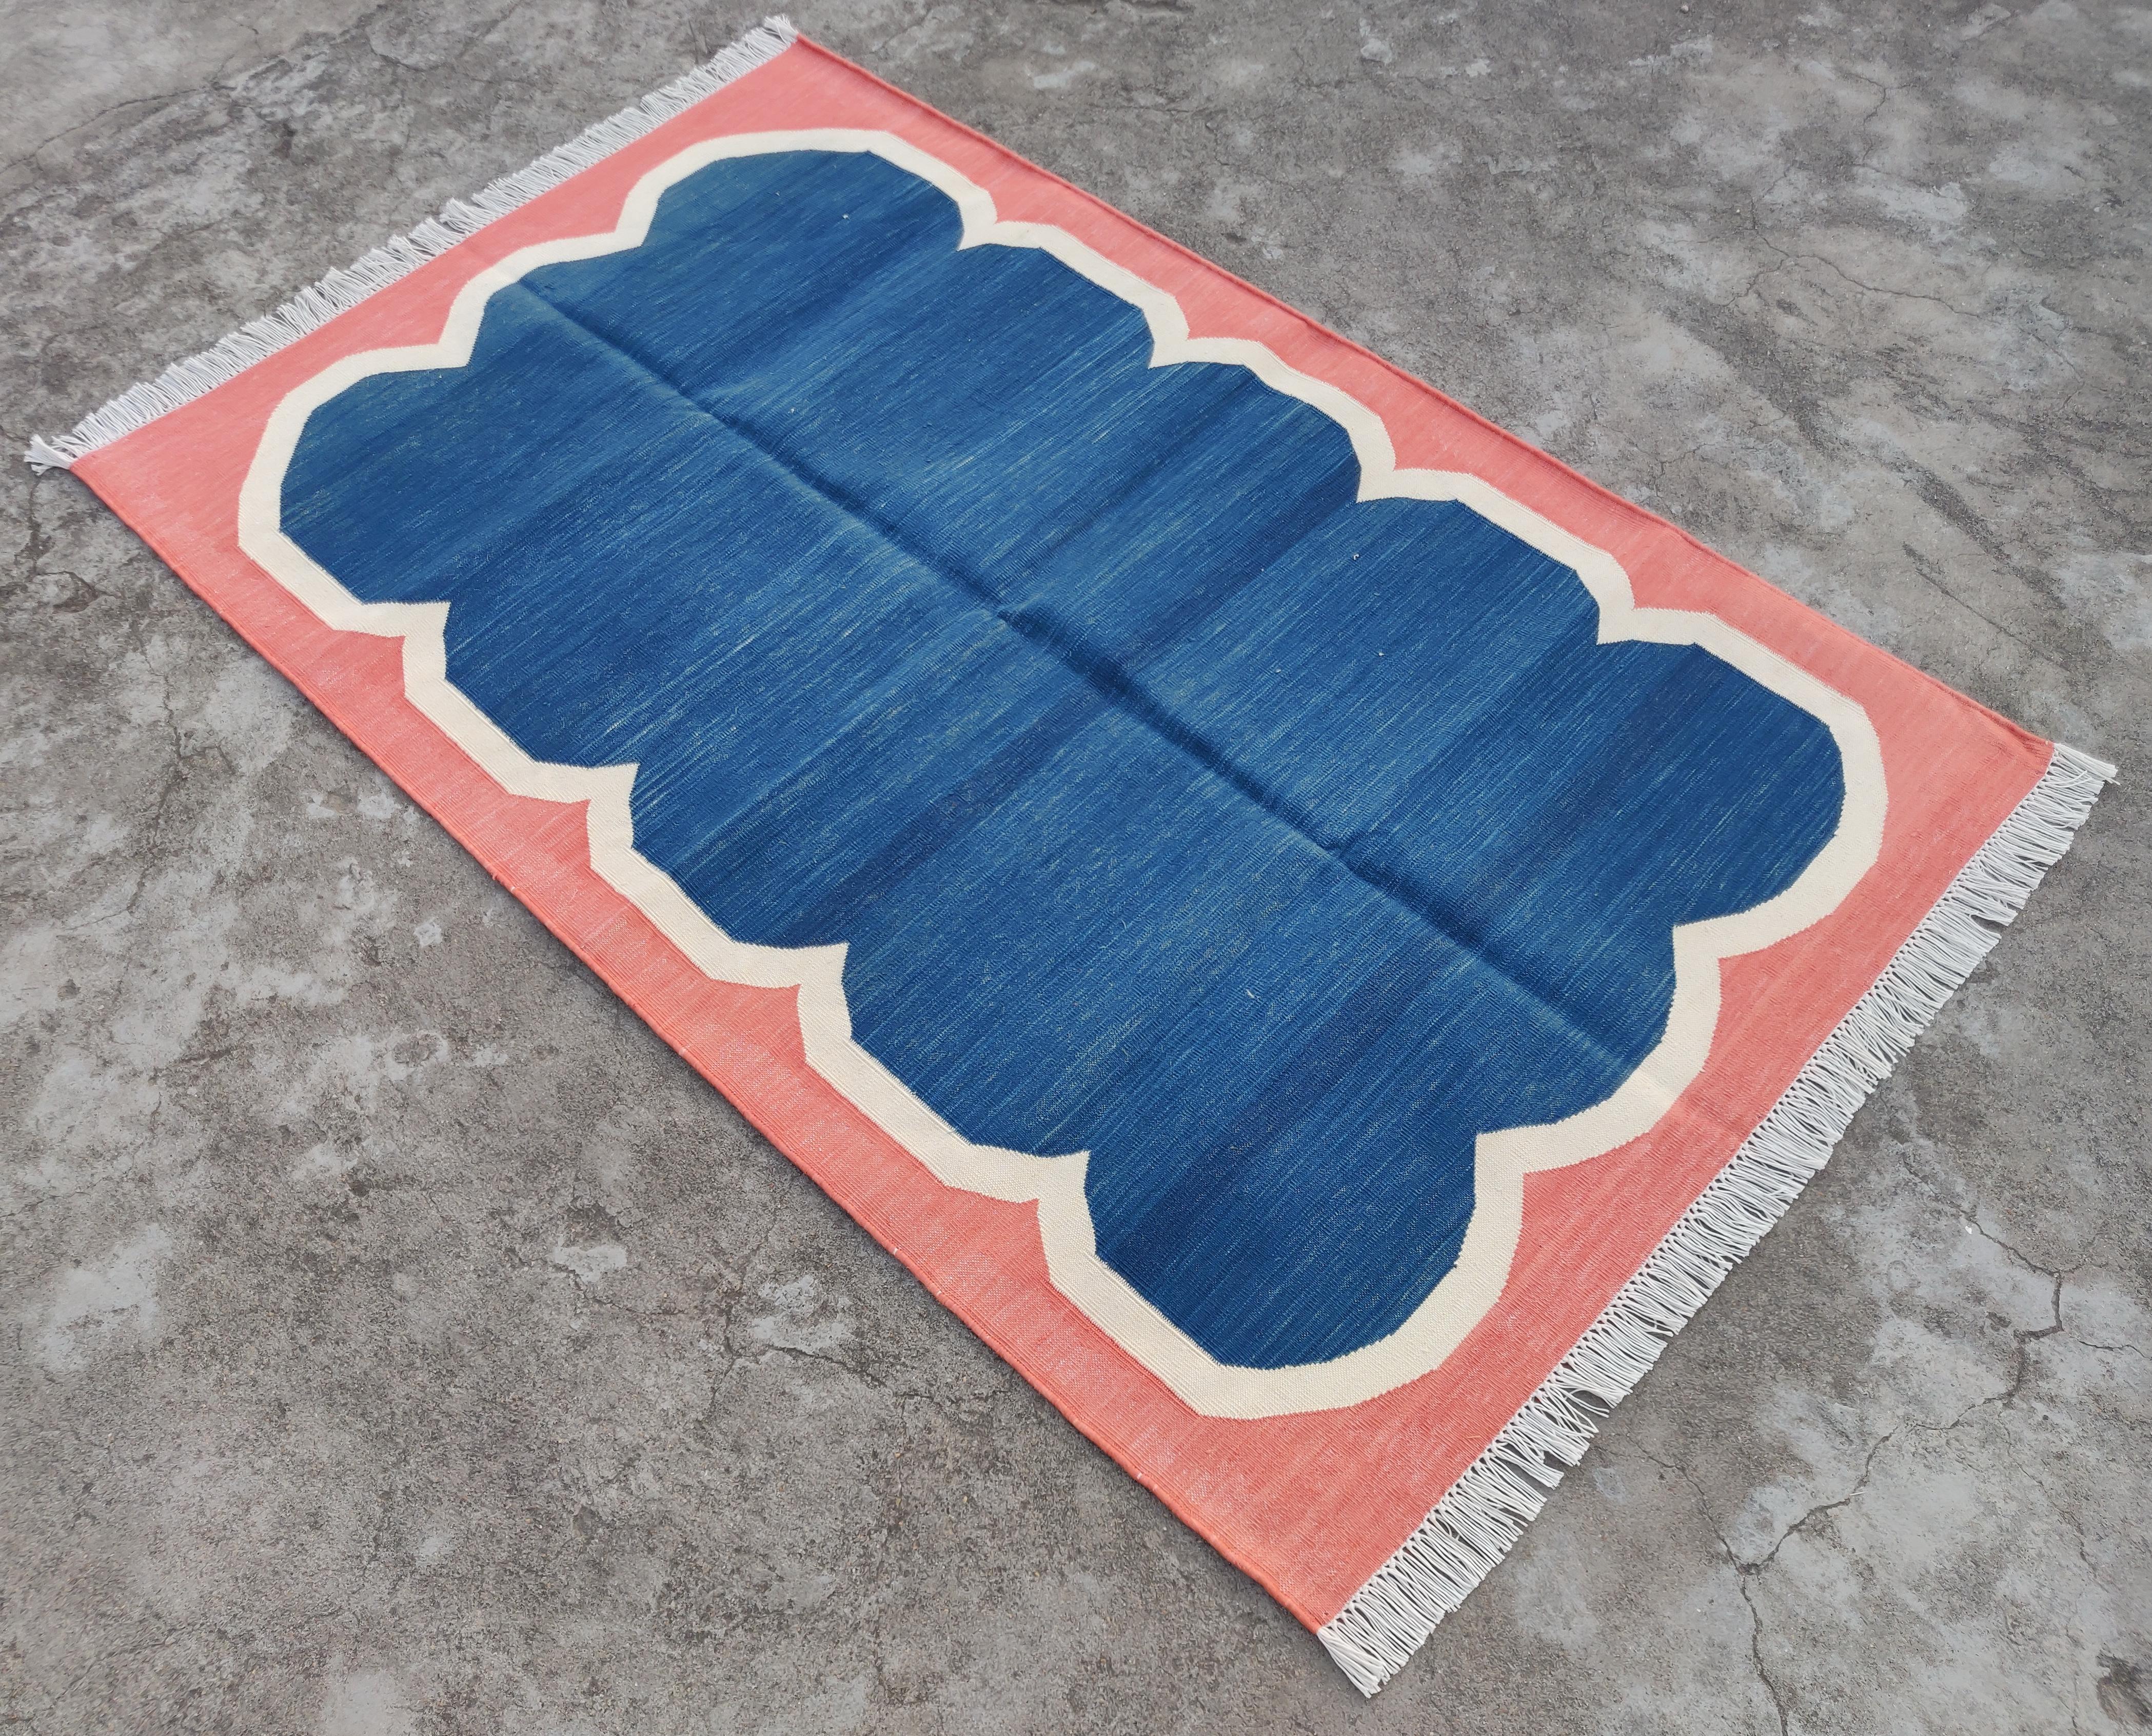 Cotton Vegetable Dyed Blue And Coral Scalloped Striped Indian Dhurrie Rug-3'x5' 
These special flat-weave dhurries are hand-woven with 15 ply 100% cotton yarn. Due to the special manufacturing techniques used to create our rugs, the size and color